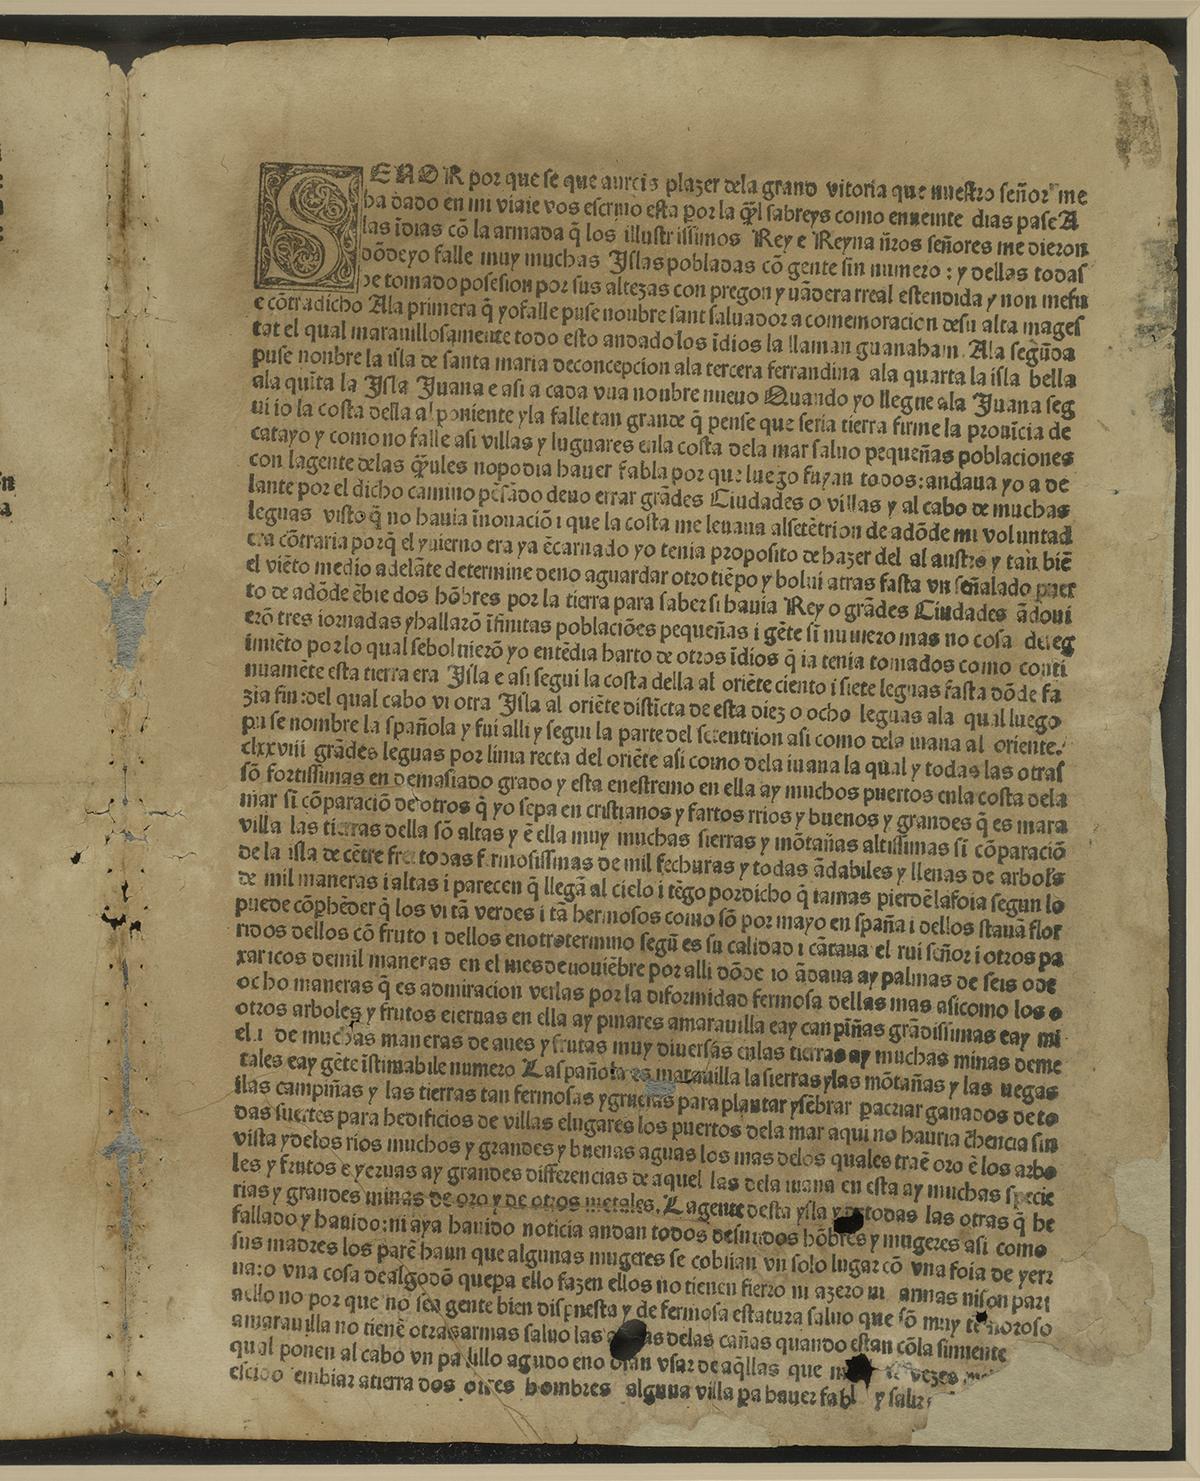 The first edition of a letter Christopher Columbus wrote in 1493 that was circulated among Spanish readers. (New York Public Library)